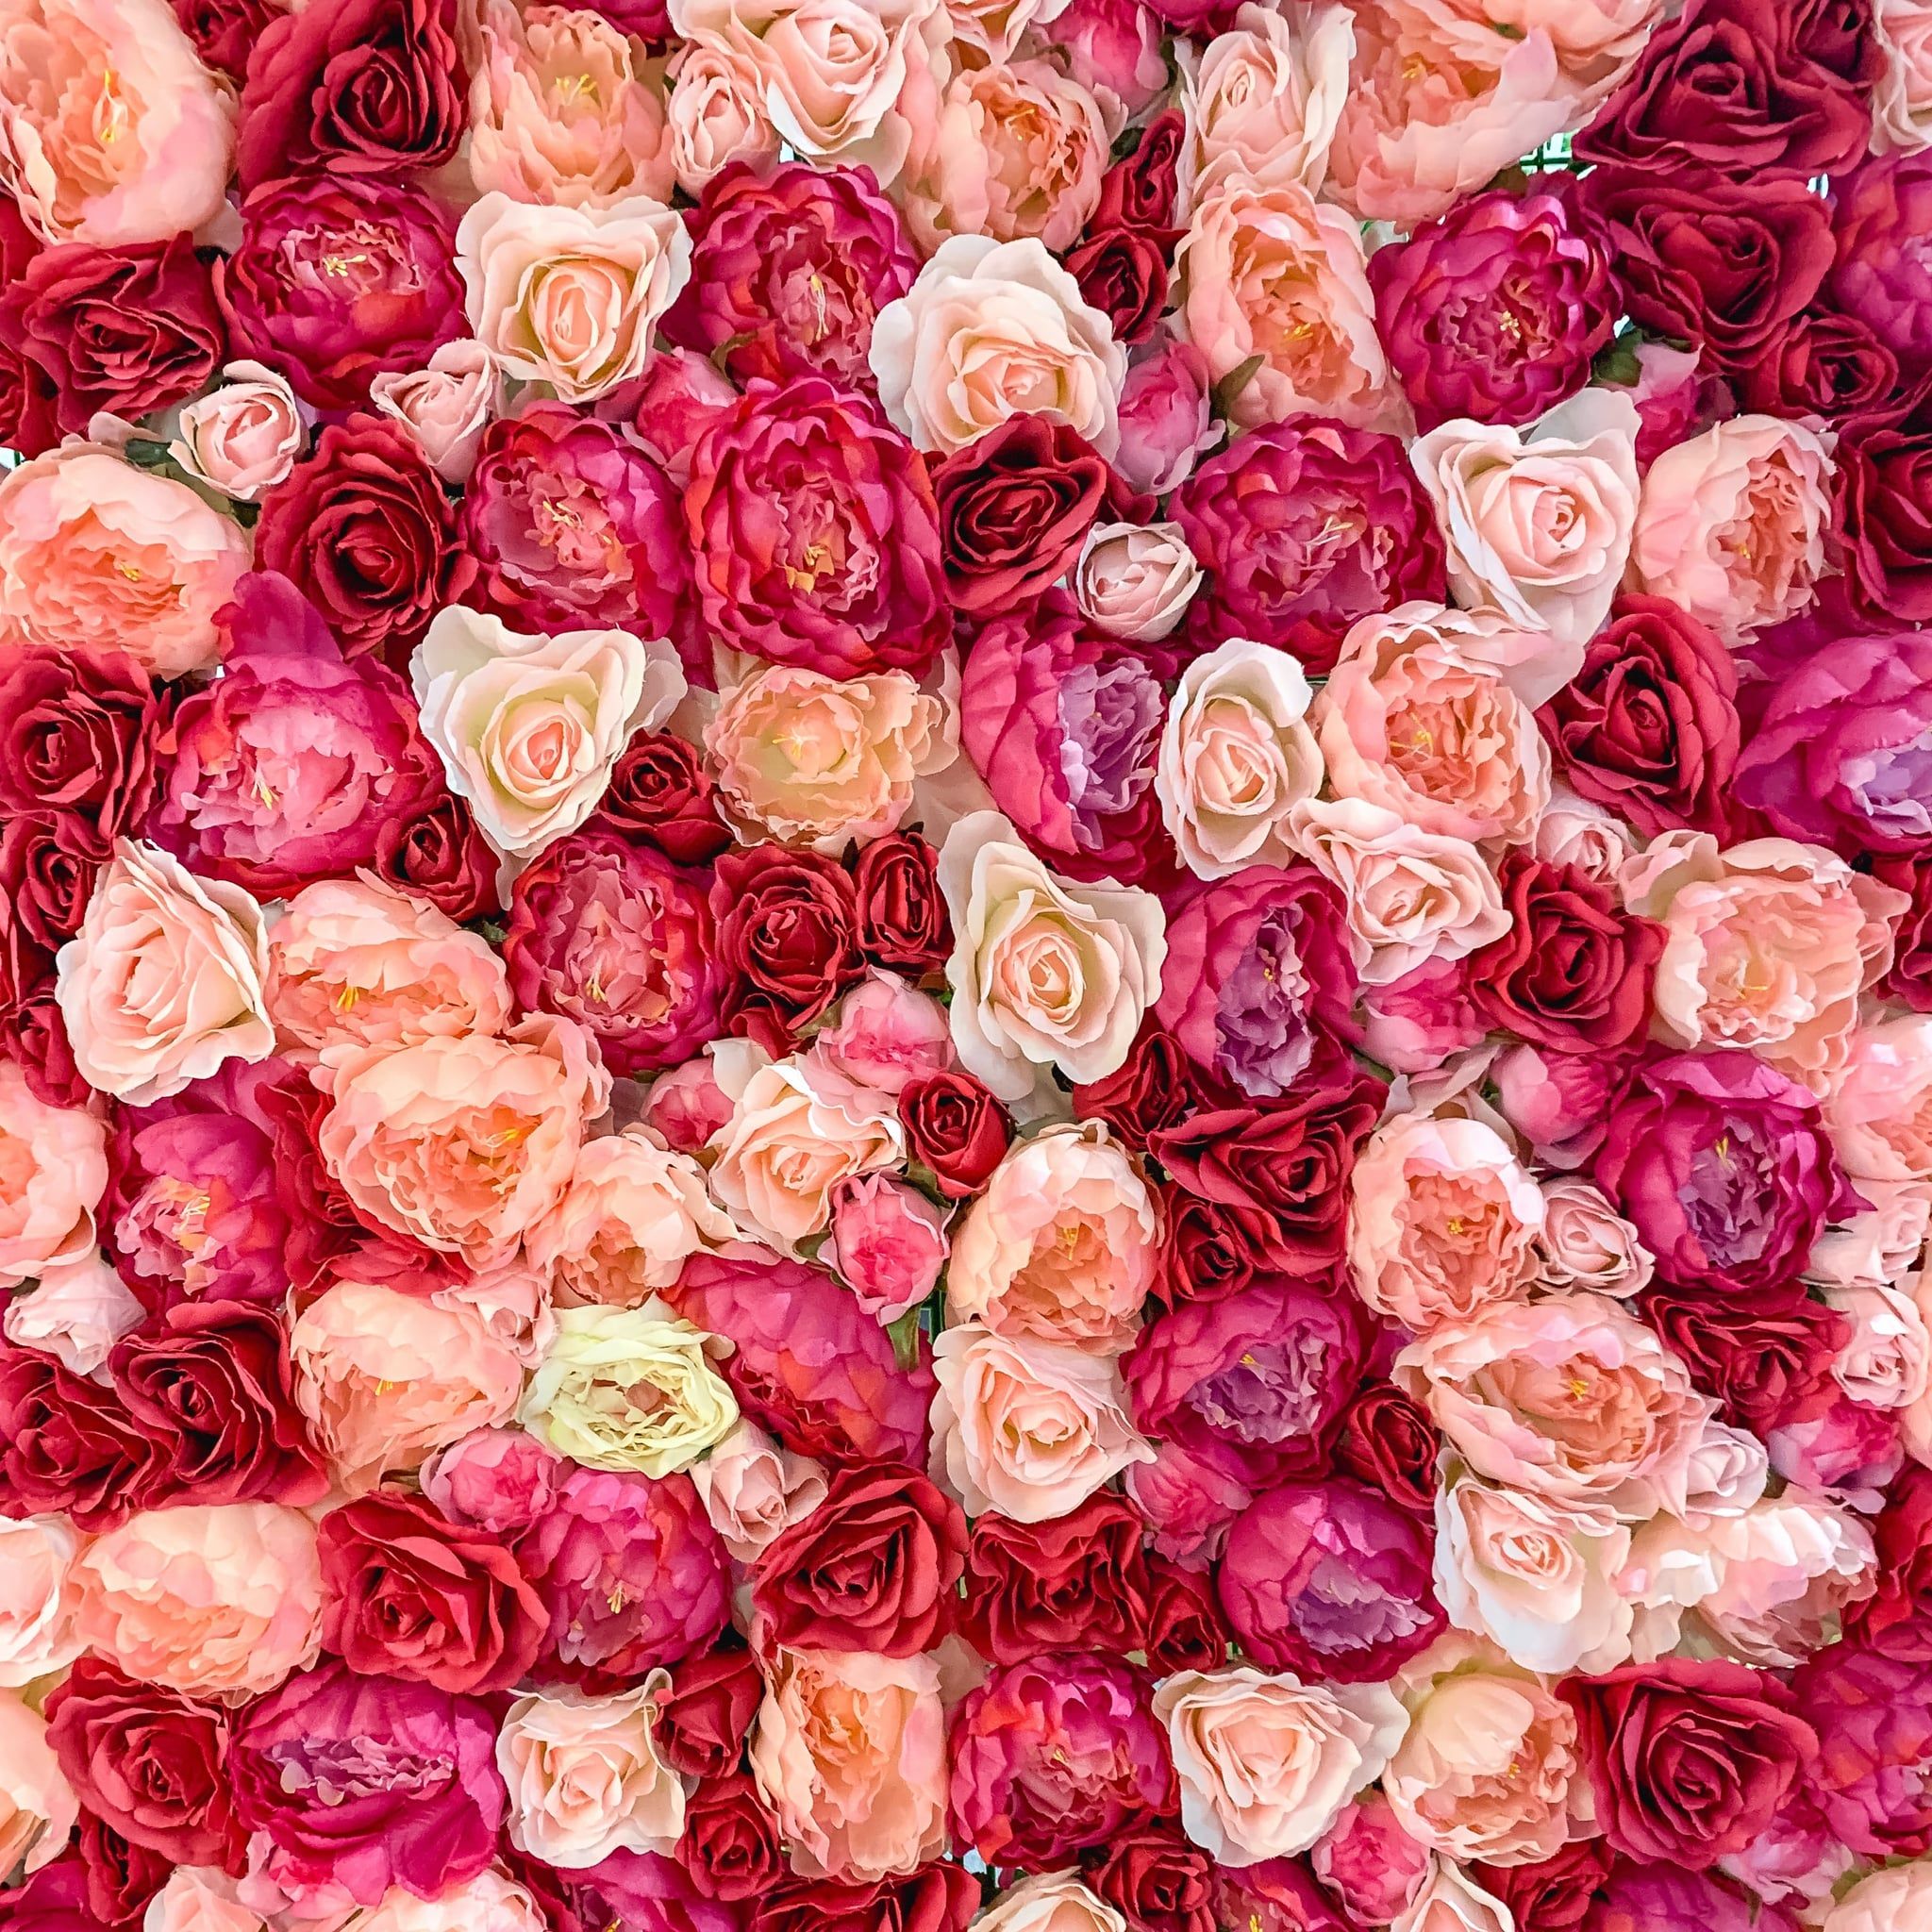 A wall of pink and red roses. - Valentine's Day, garden